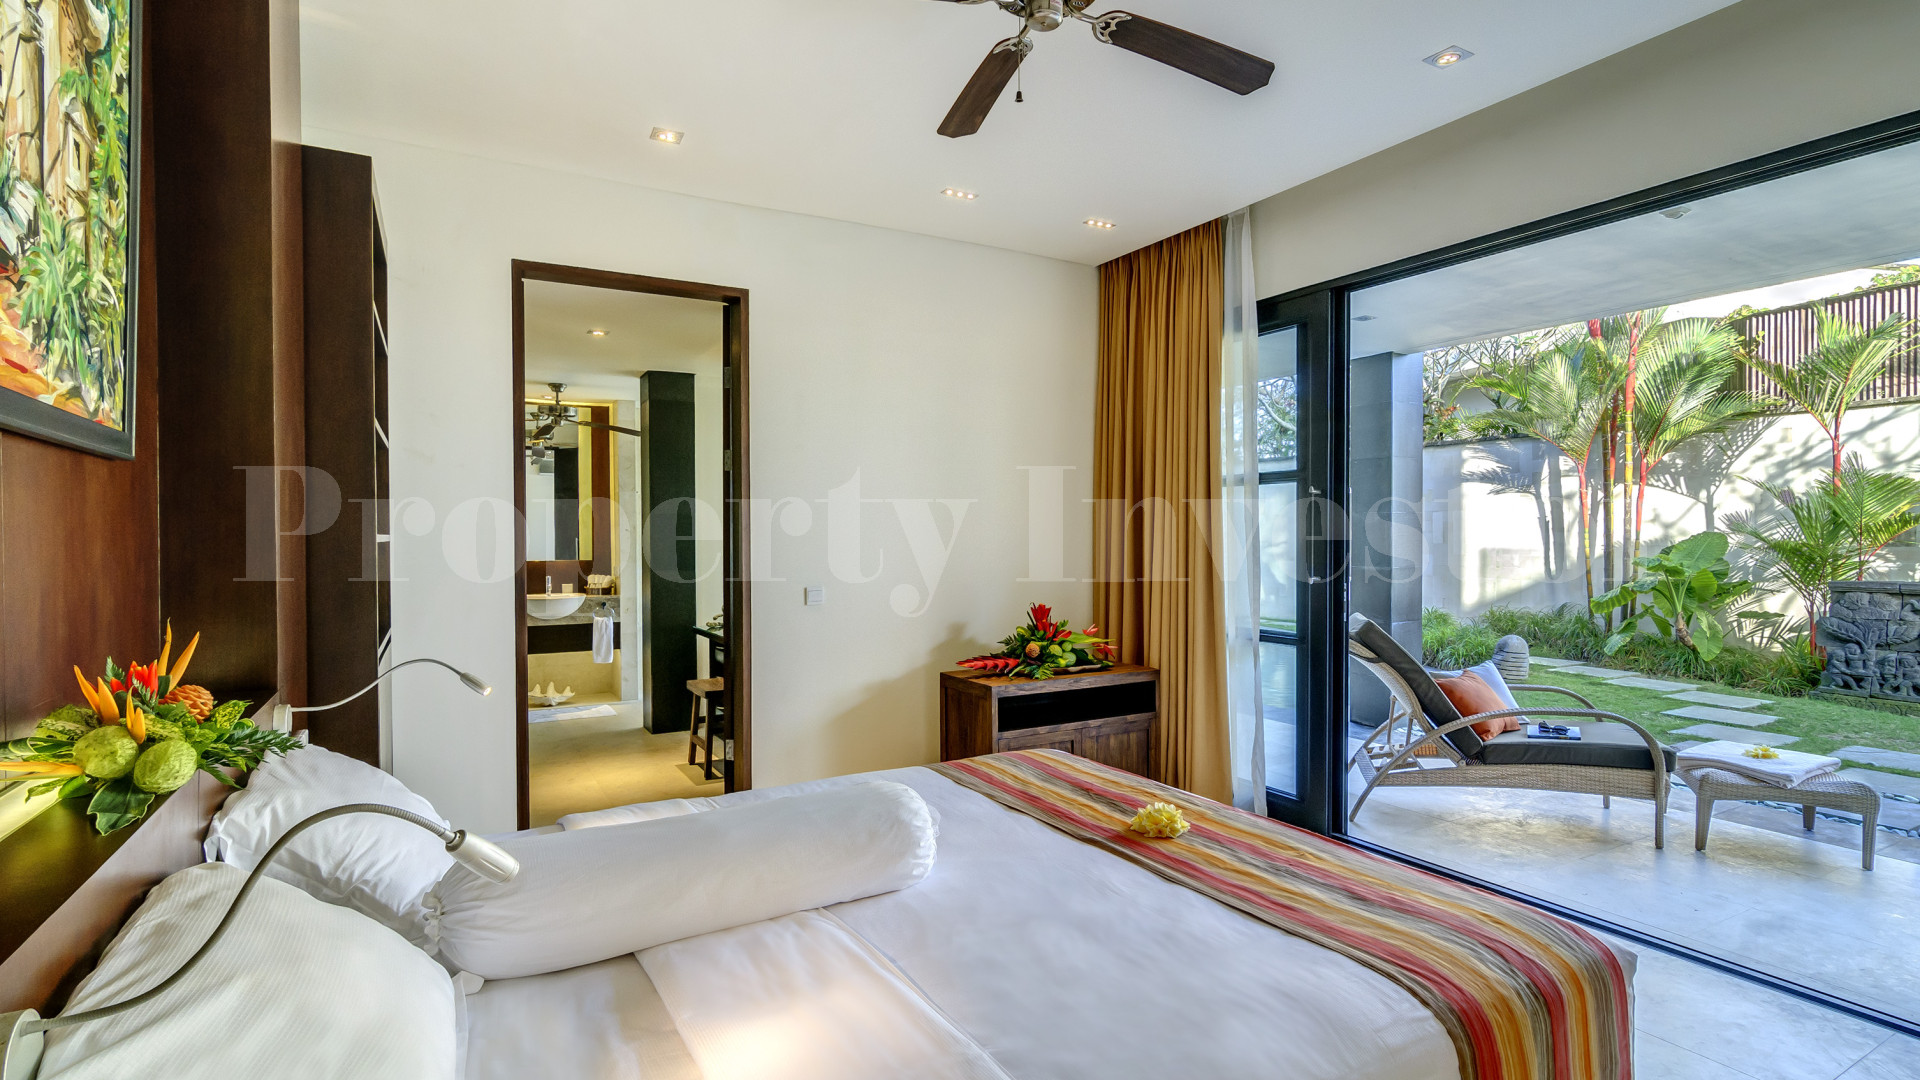 Stunning 7 Bedroom Luxury Villa with 180° Degree Panoramic Ocean Views for Sale in Pandawa, Bali